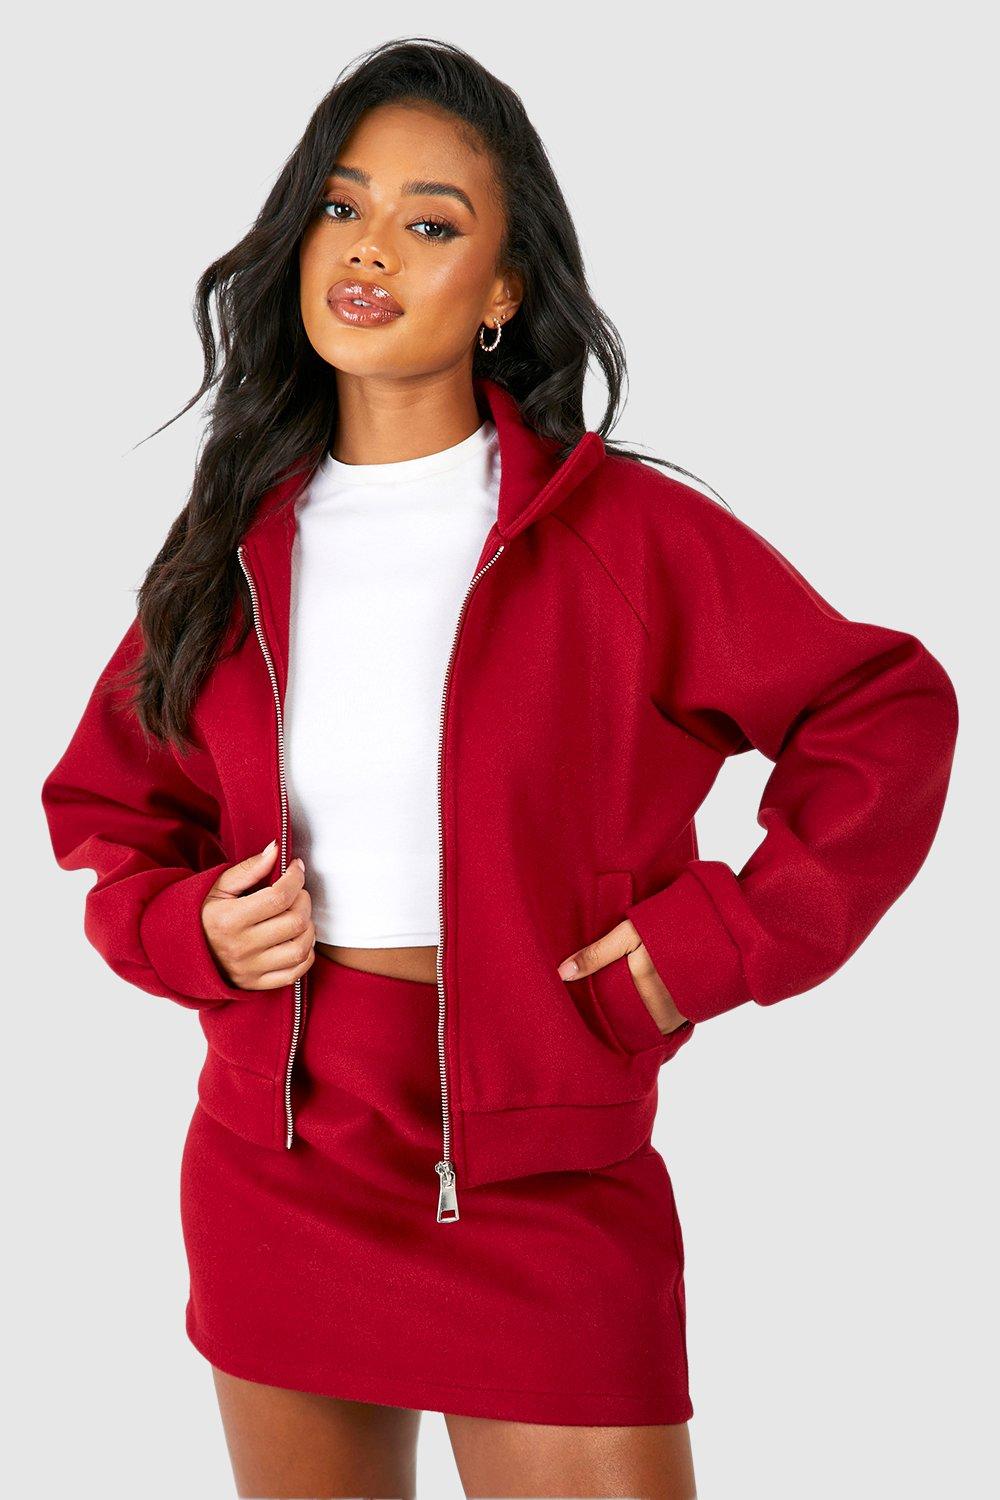 Buy A to Z CREATION Full sleev Bomber jacket for woman (Red & White)  (Small) at Amazon.in